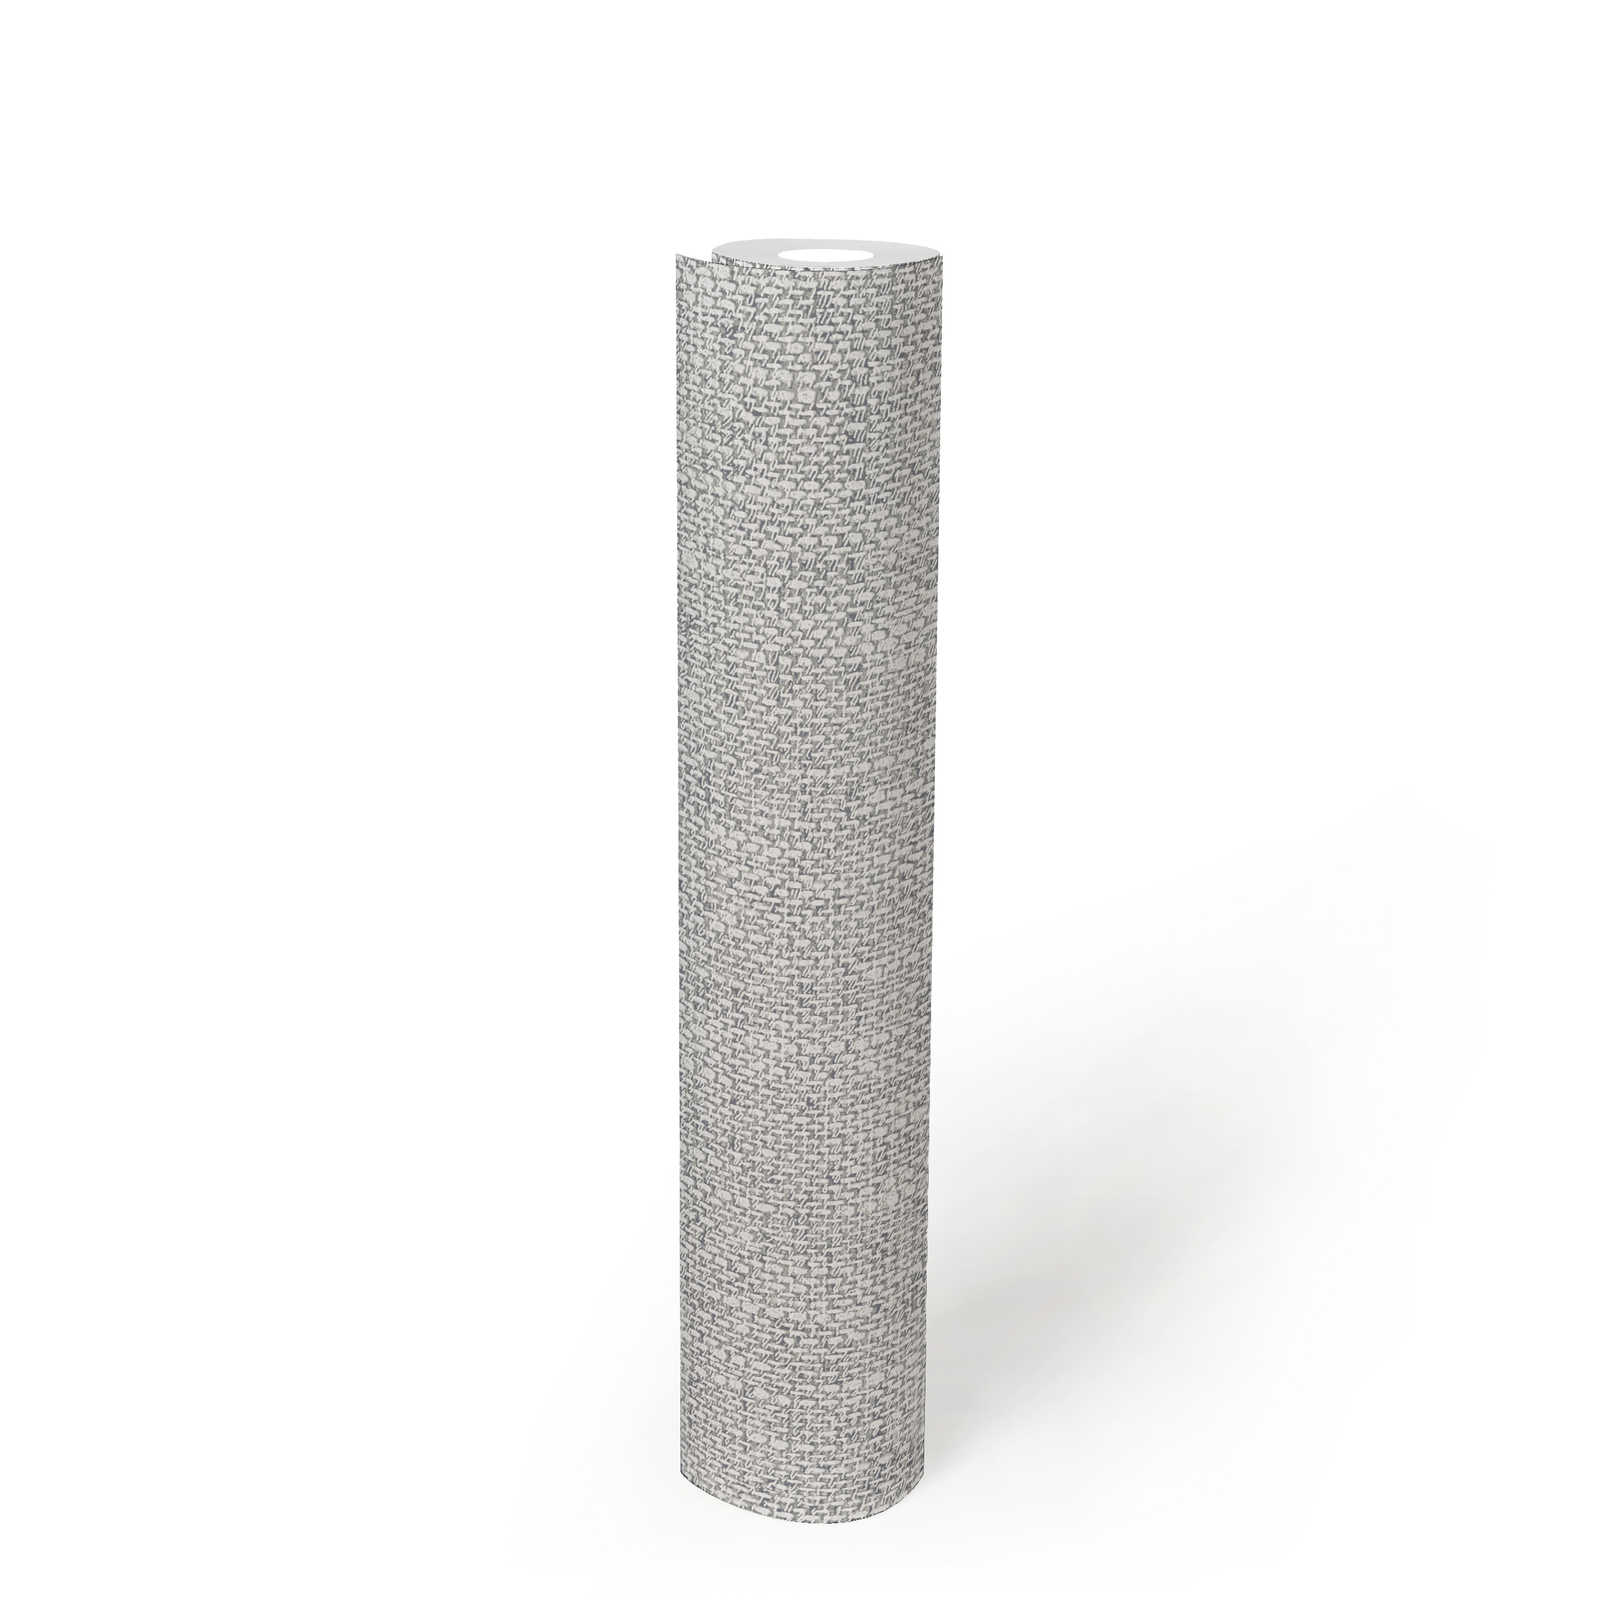             Non-woven wallpaper with realistic fabric look - grey, white
        